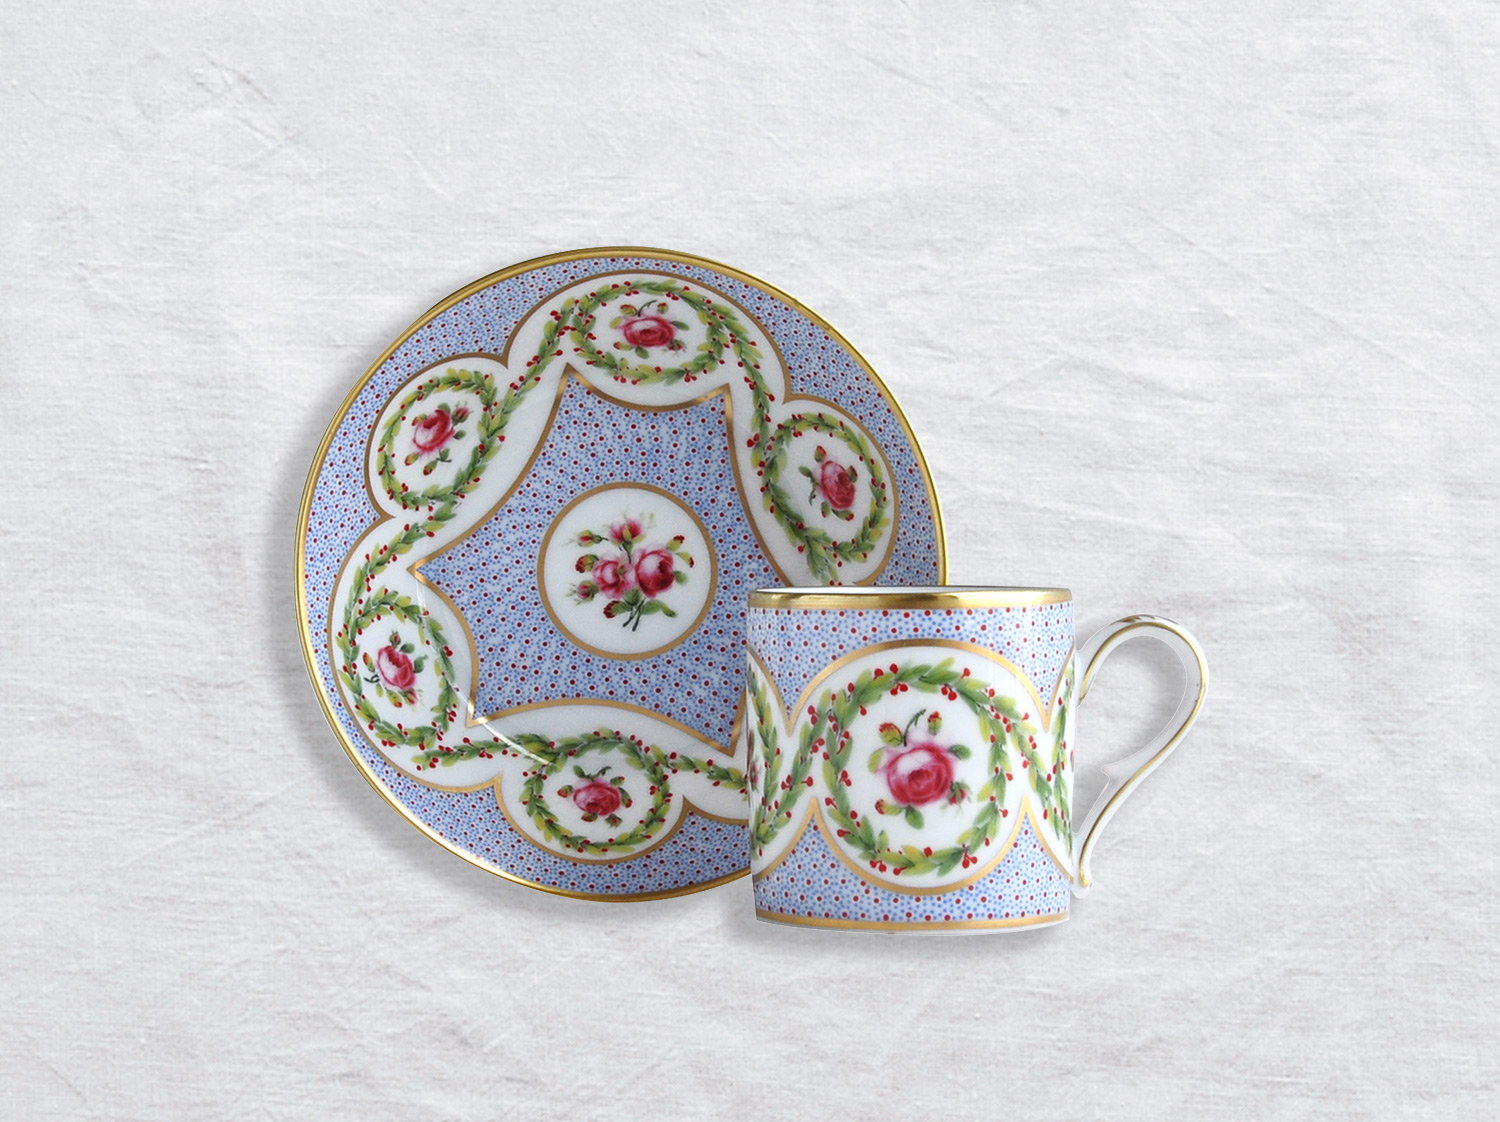 China Litron cup and saucer of the collection Myrtes et roses | Bernardaud